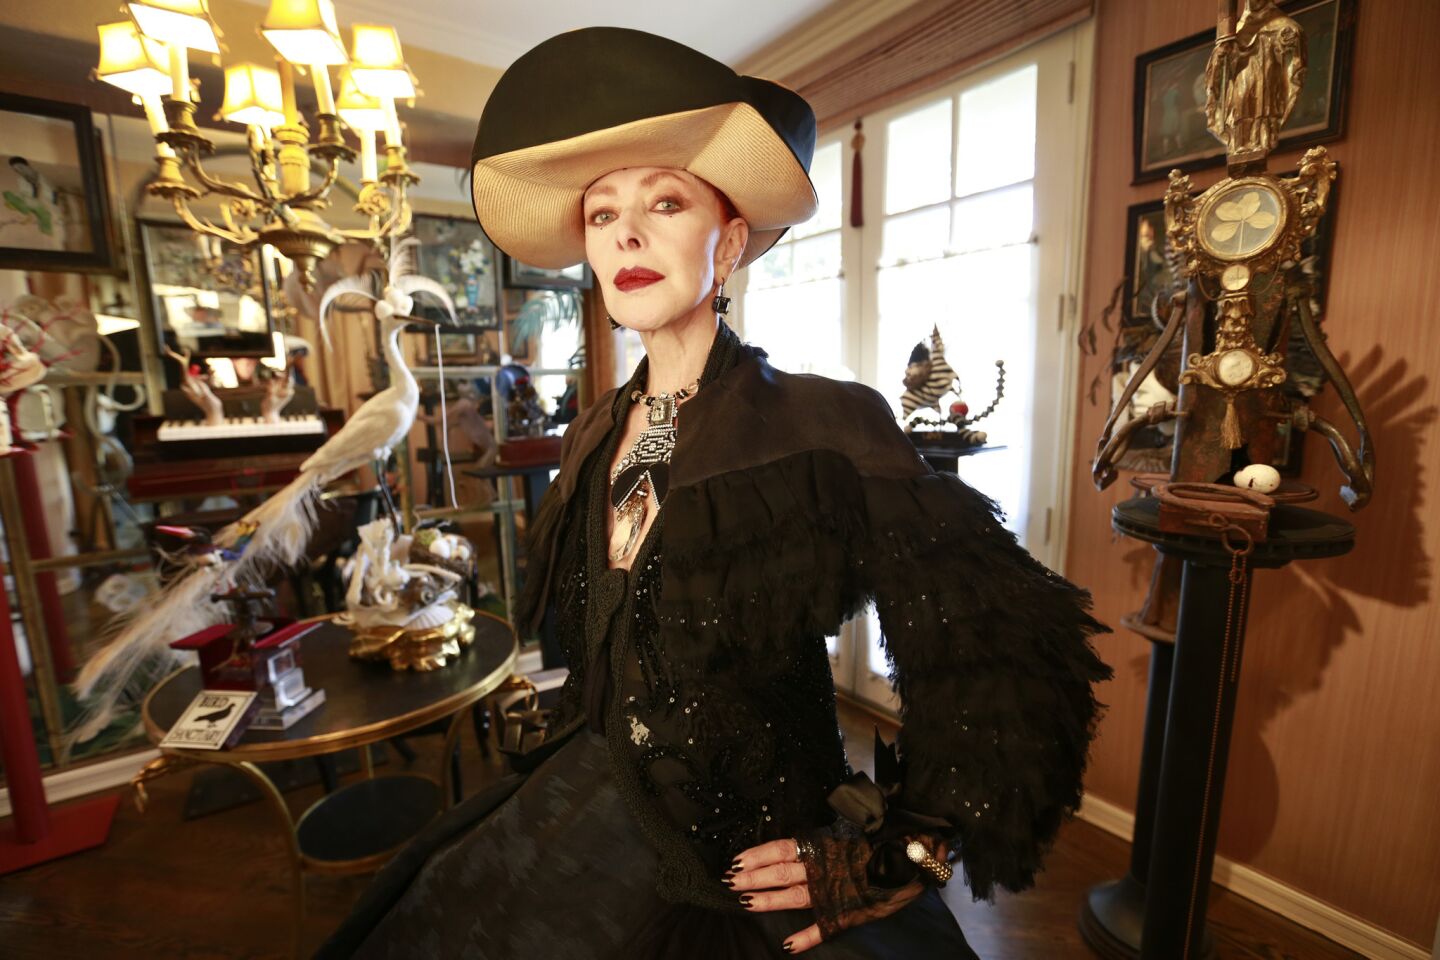 Valerie von Sobel, who is on the cover of the book "Advanced Style: Older and Wiser," is photographed with her artwork at her home.